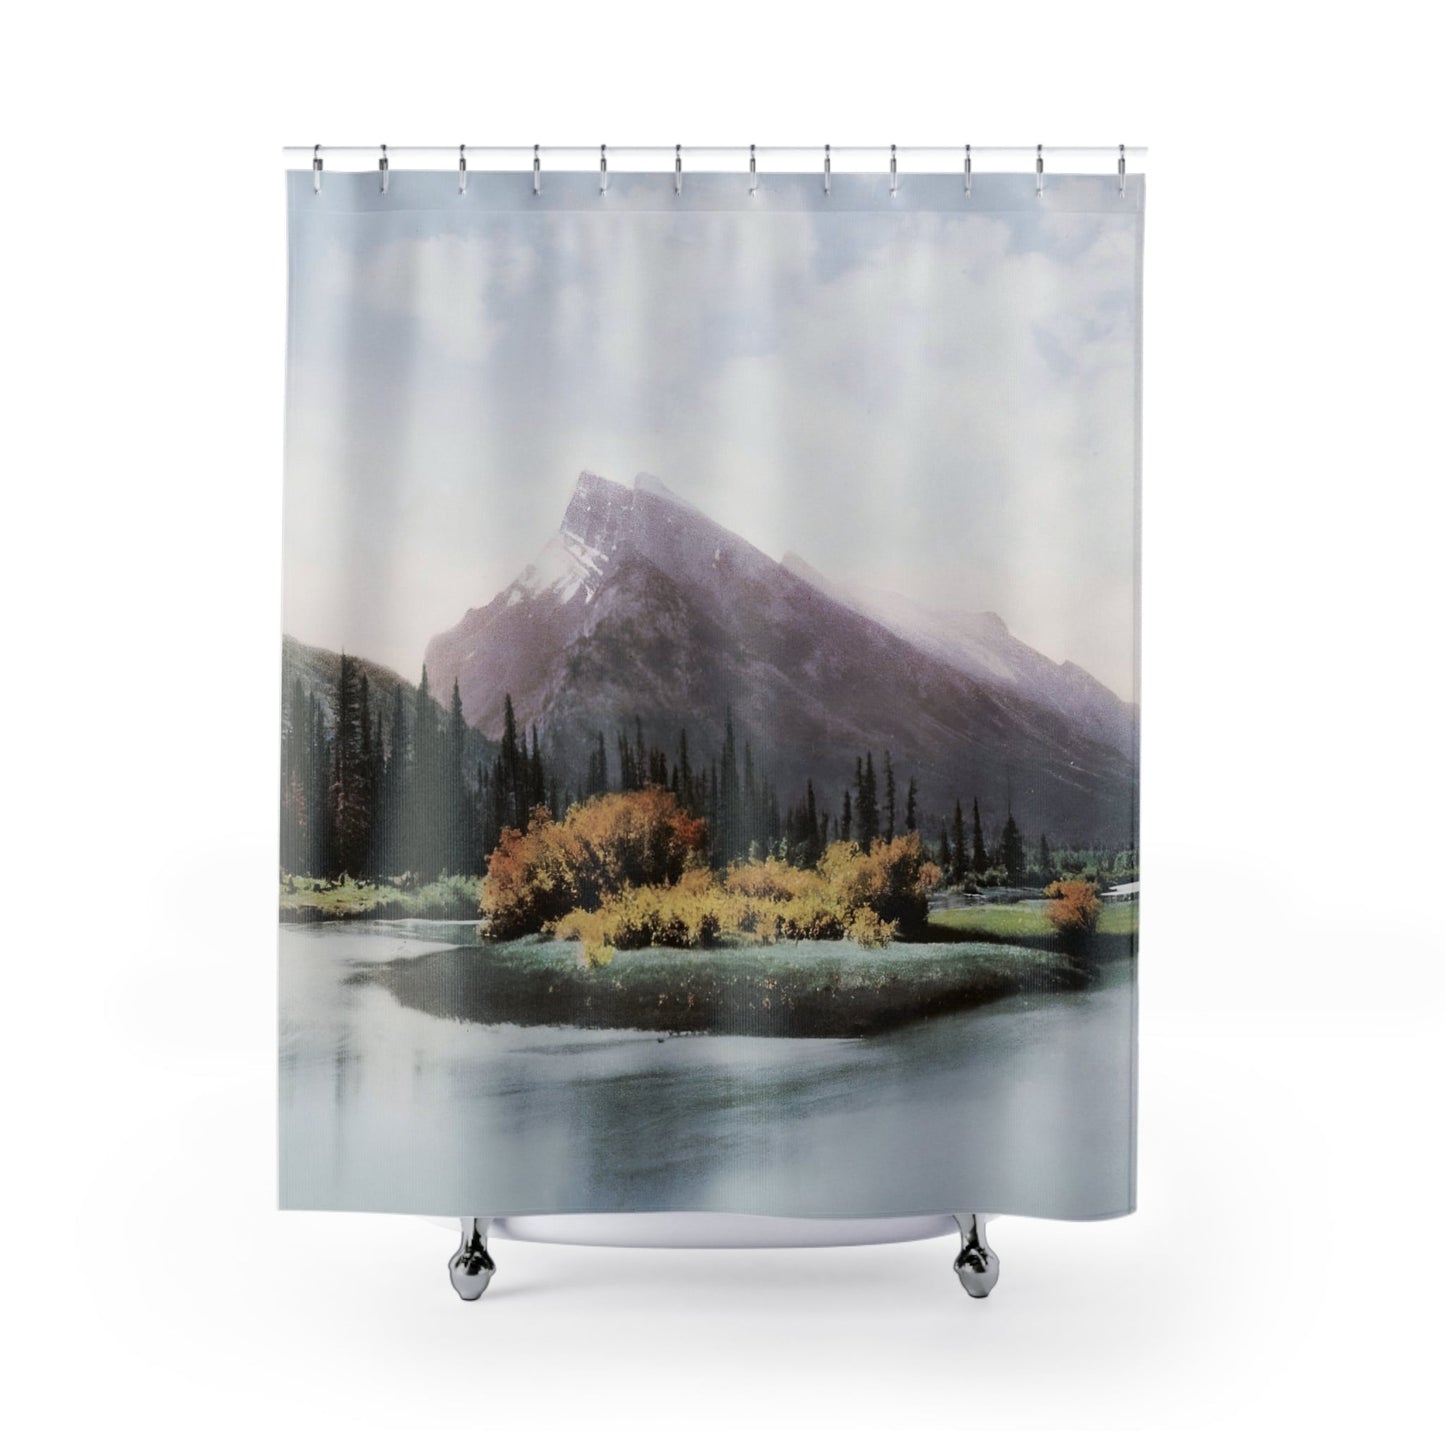 Canada Mountain Landscape Shower Curtain with Mount Arundel design, scenic bathroom decor featuring Canadian mountain scenery.